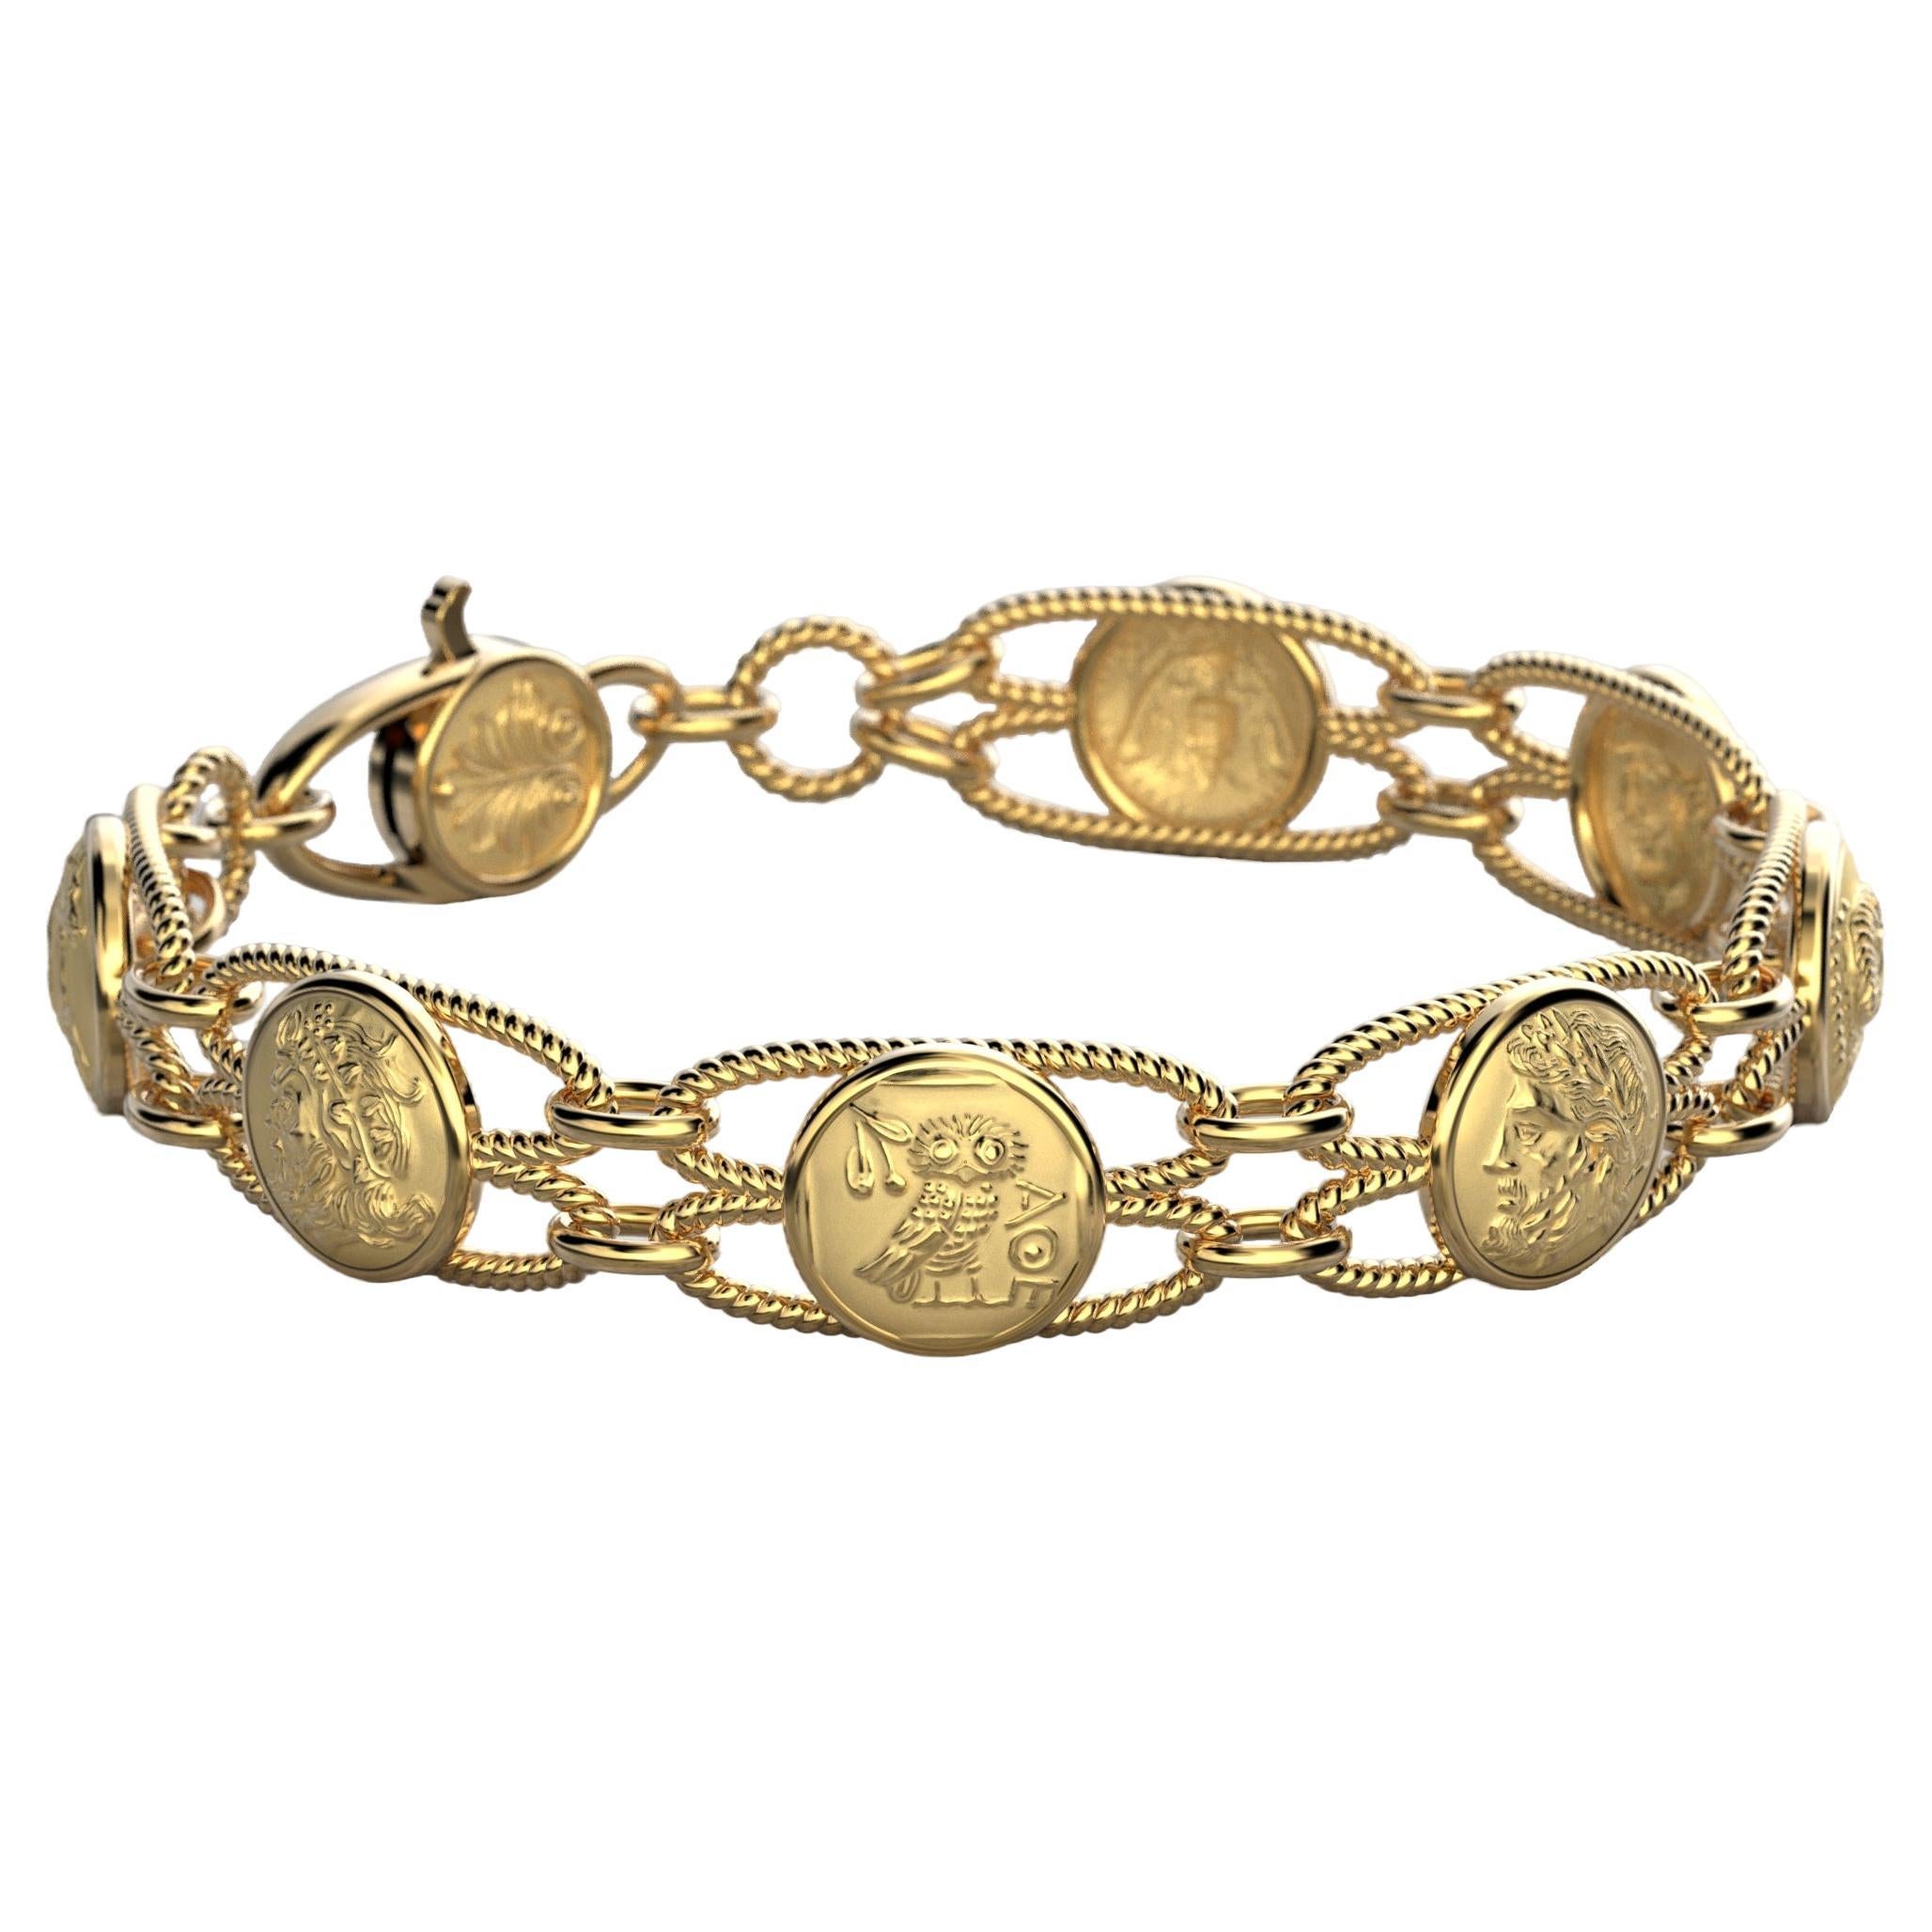 Italian Bracelet in 14k Gold Made in Italy by Oltremare Gioielli, Greek Style For Sale